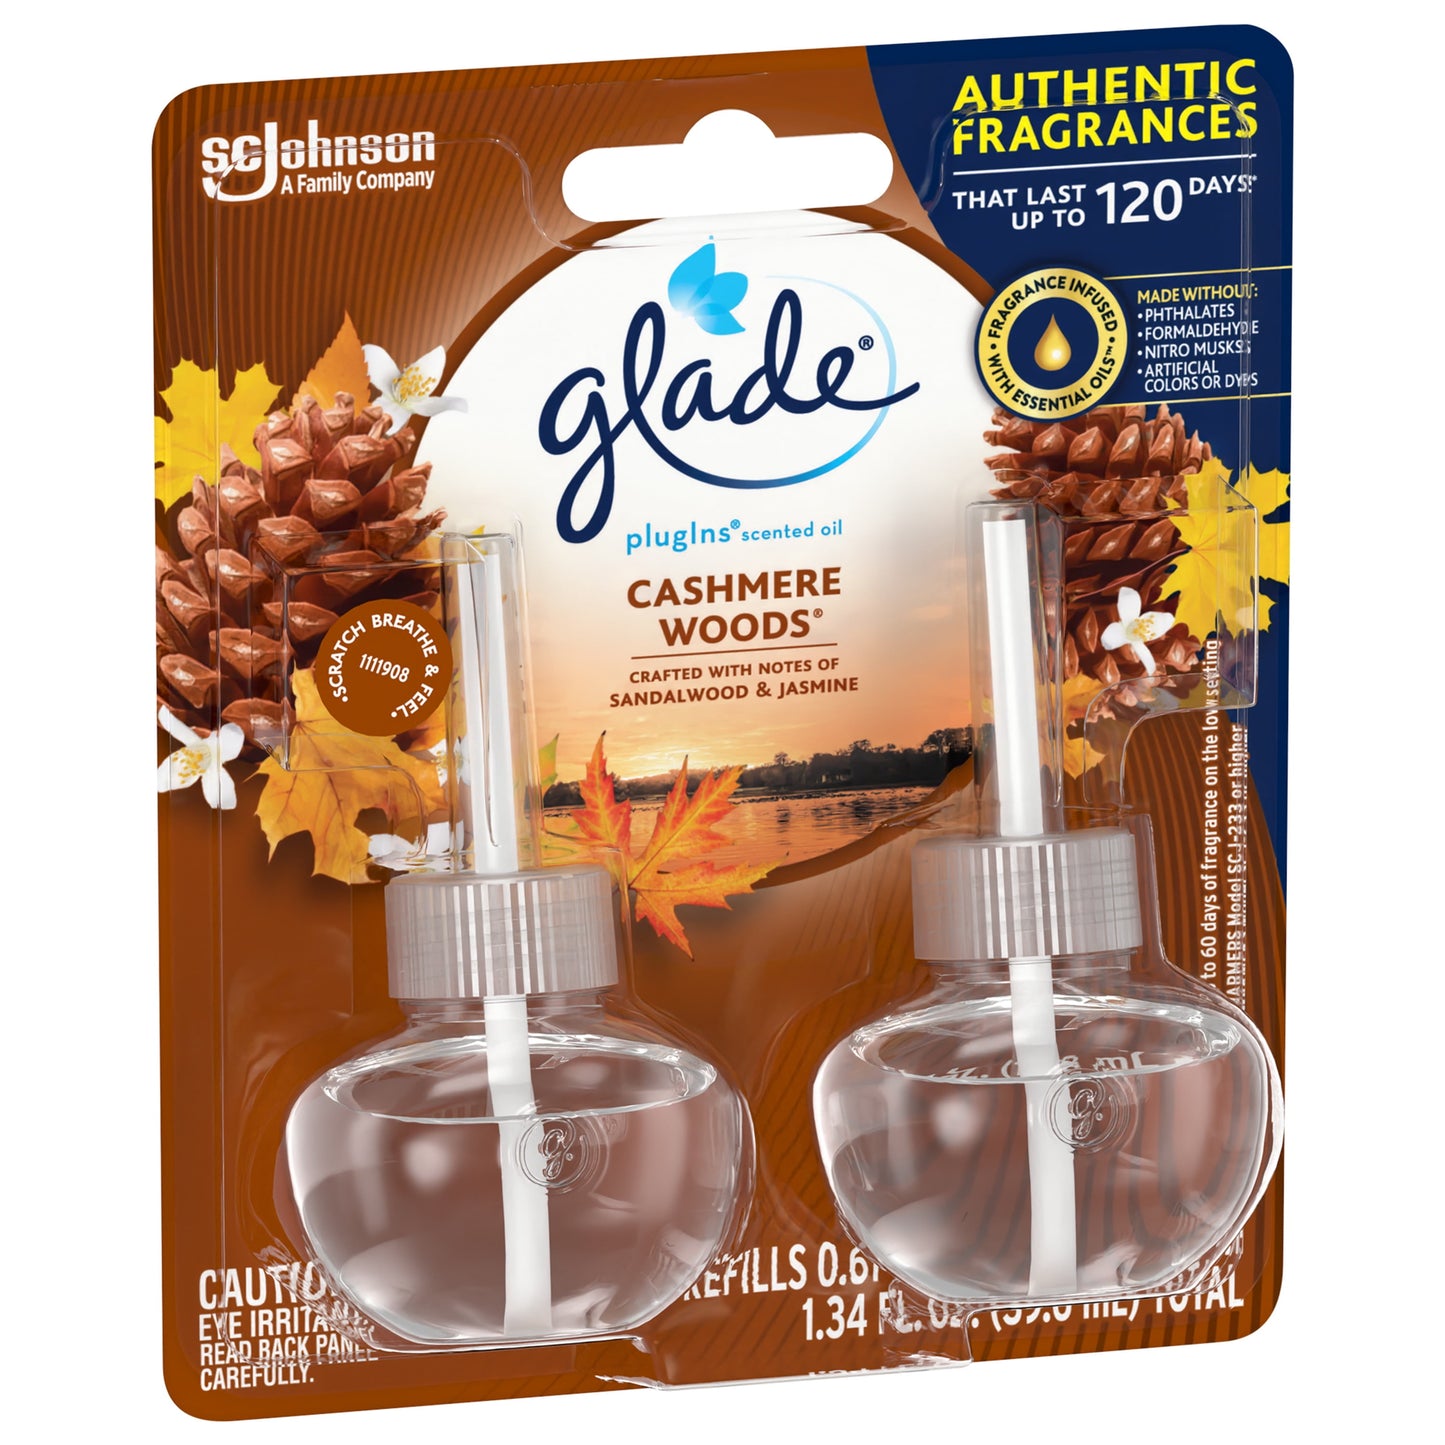 Glade PlugIns Refill 2 ct, Cashmere Woods, 1.34 FL. oz. Total, Scented Oil Air Freshener Infused with Essential Oils